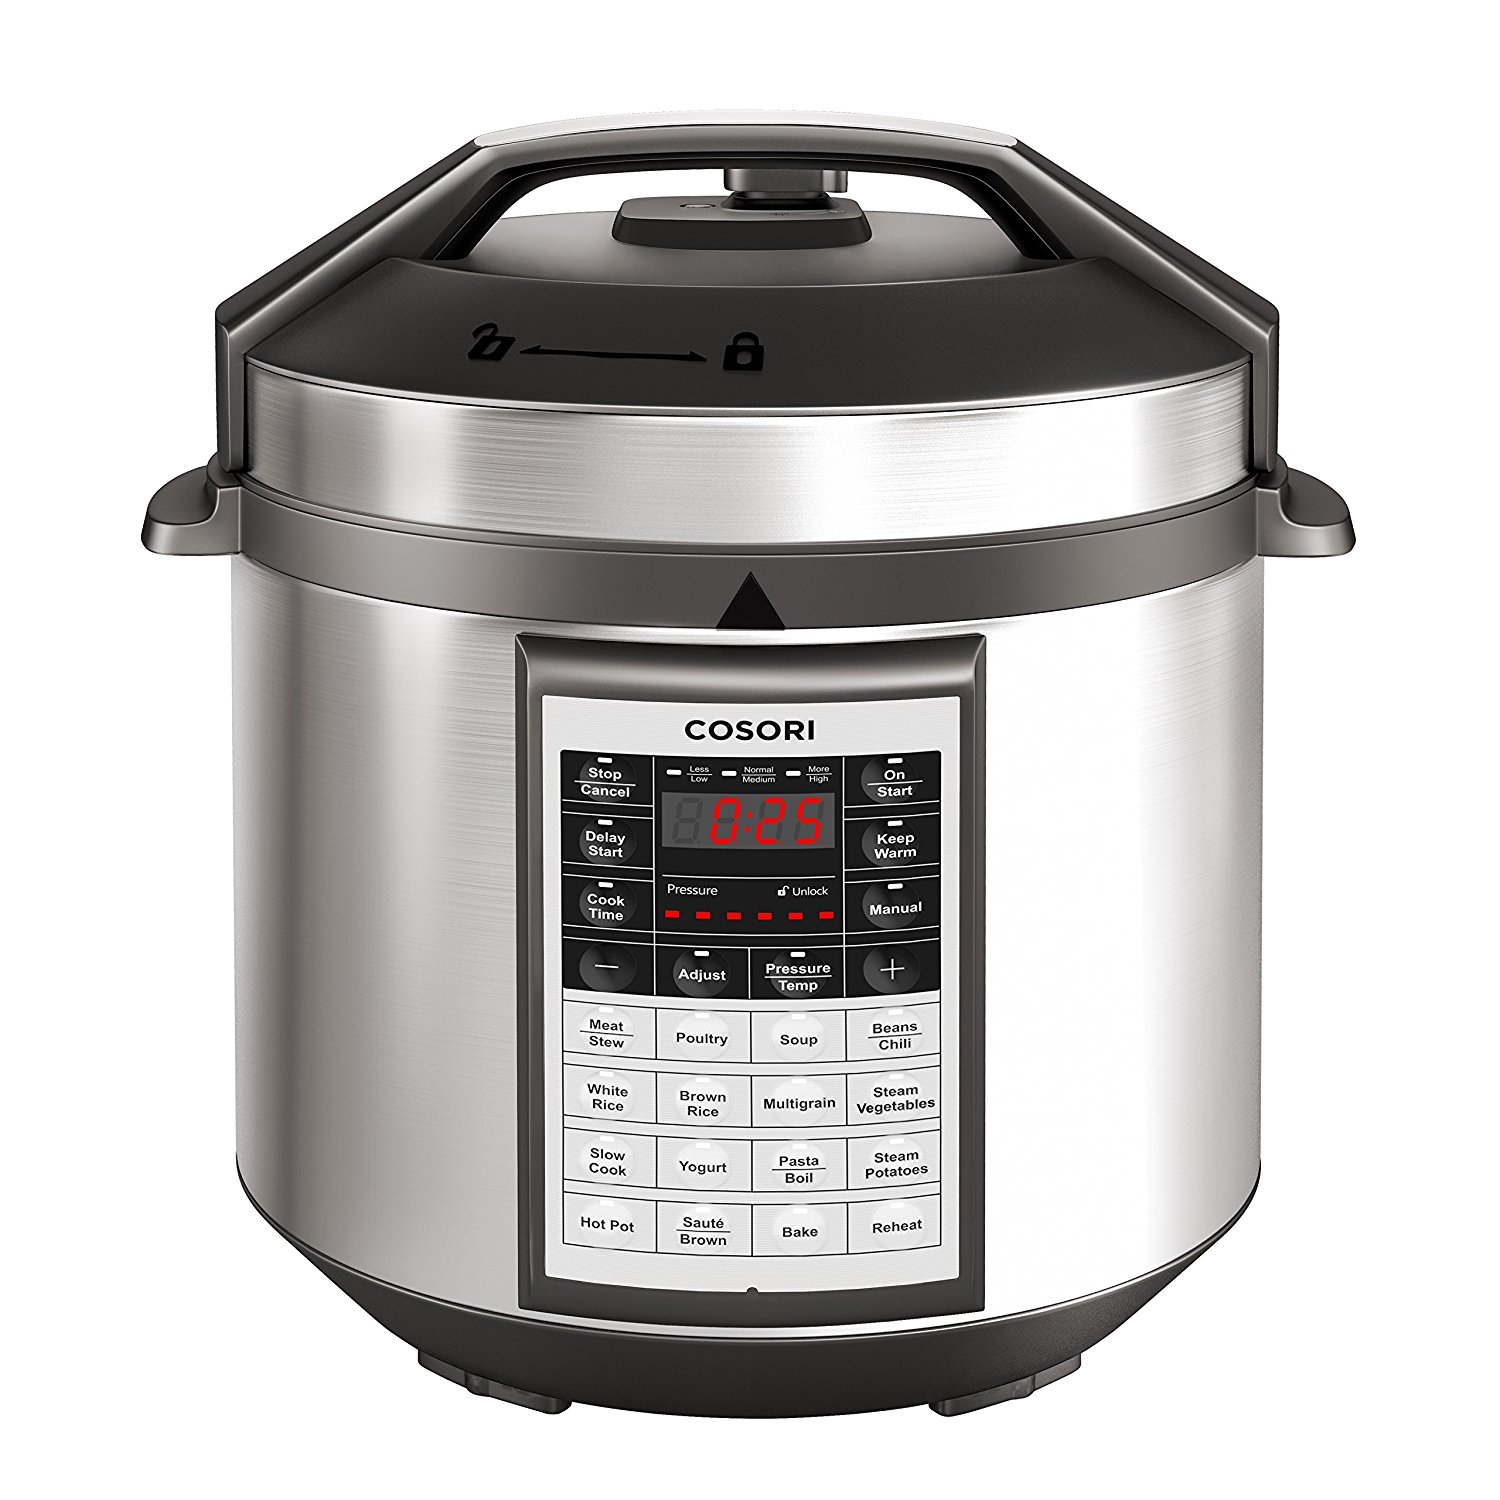 Today only: Cosori 6-quart premium 8-in-1 programmable multi-cooker for $60